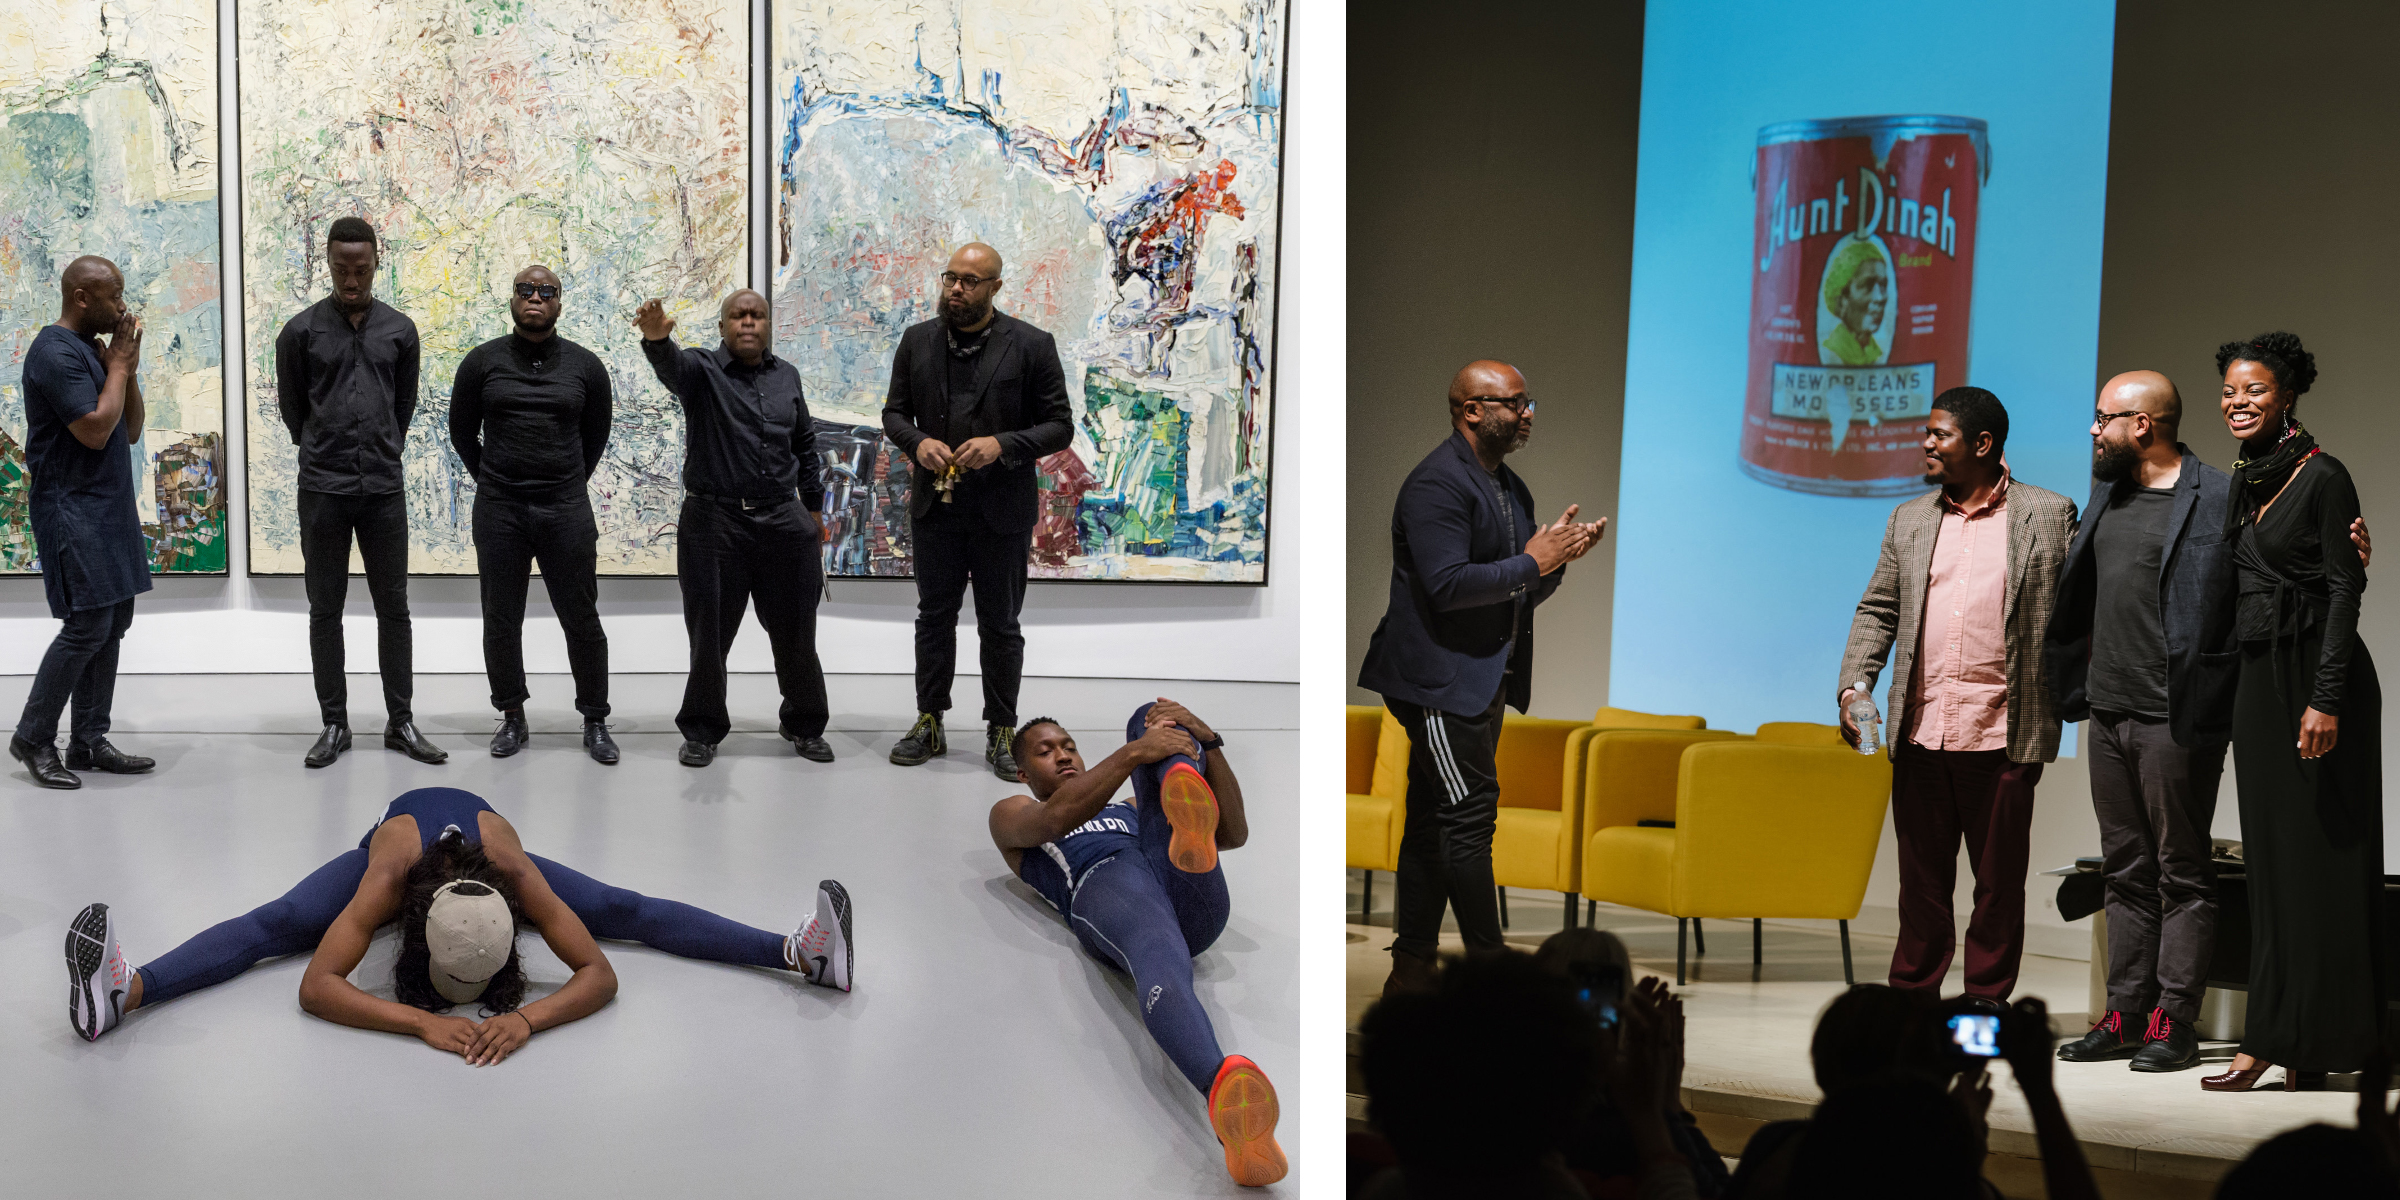 Image (left): Theaster Gates, “The Runners,” part of the “Processions” series, September 21, 2016. Image (right): Theaster Gates, “Plantation Lullabies,” part of the “Processions” series, October 13, 2017.